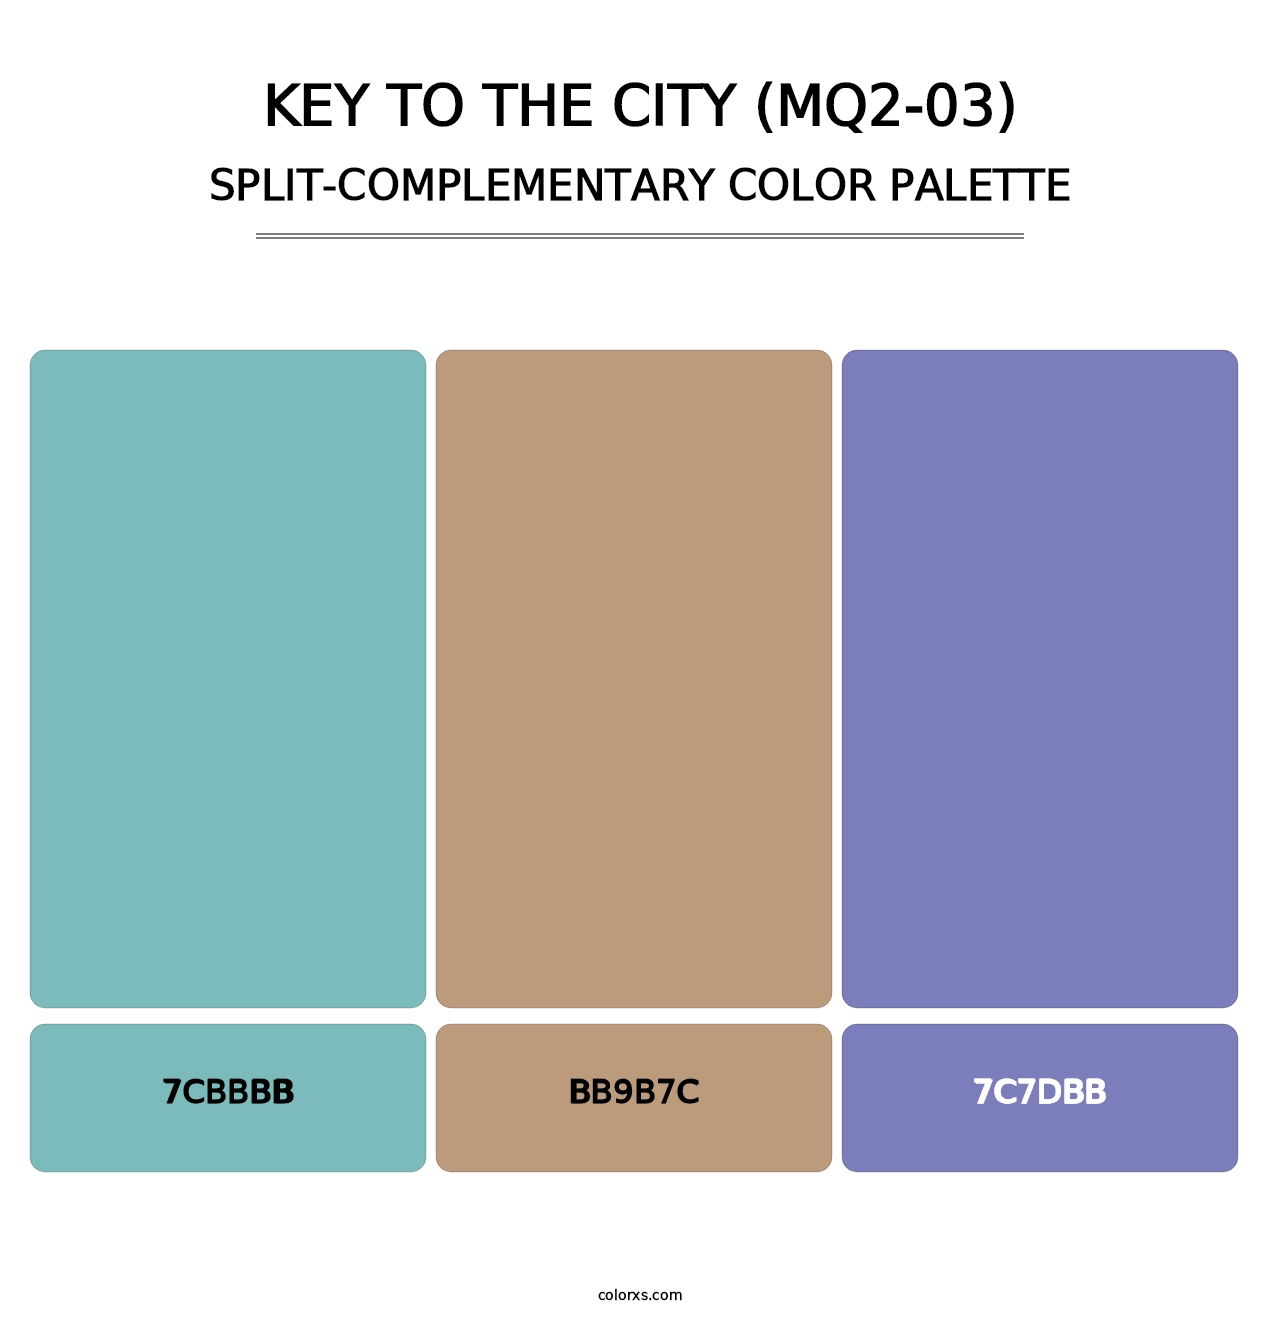 Key To The City (MQ2-03) - Split-Complementary Color Palette